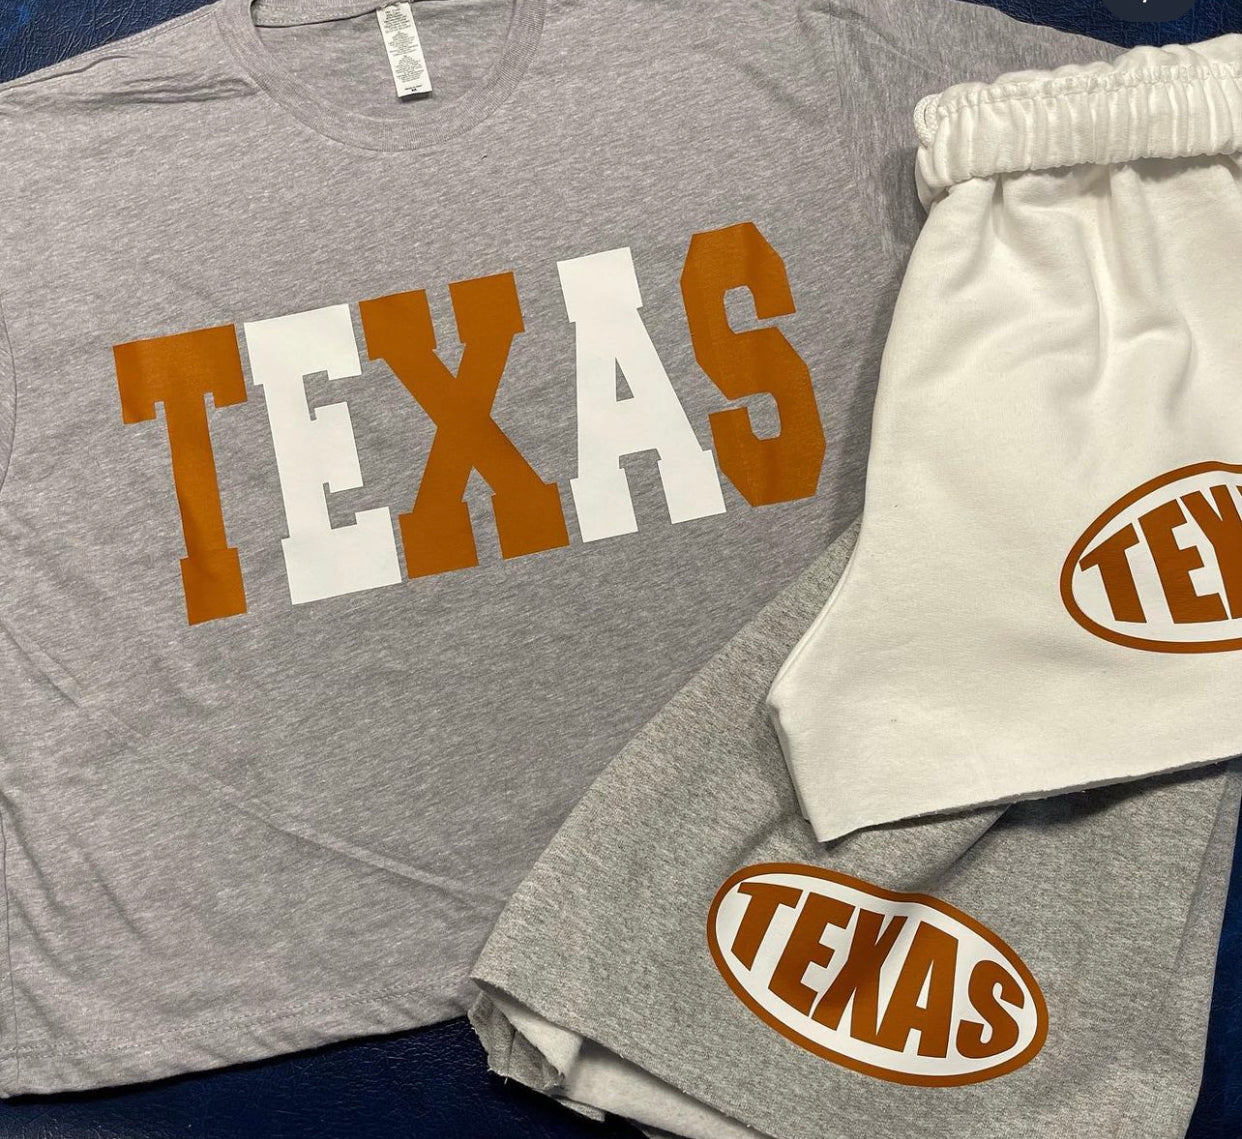 Custom college alt color cropped hoodie or tee (can make for ANY school or camp) Sweatpants are also available in a separate listing